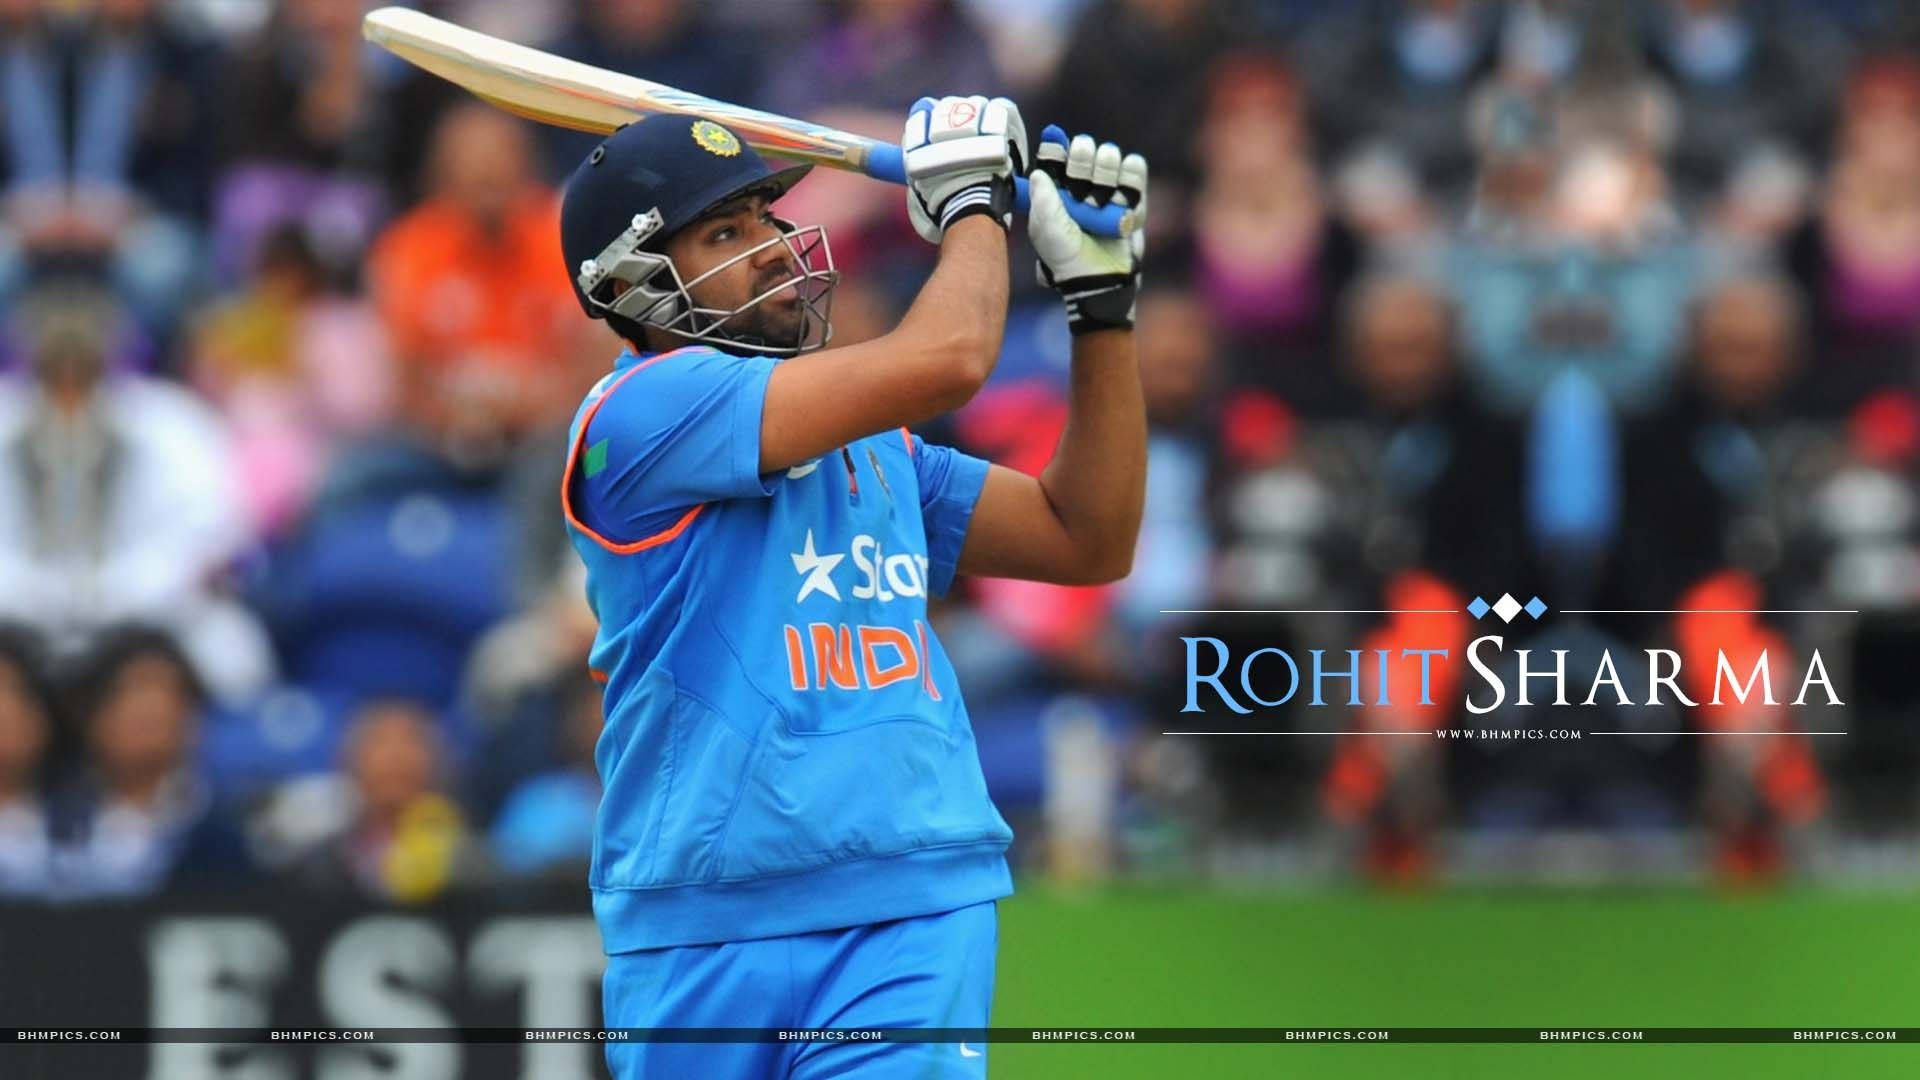 Indian Cricketer Rohit Sharma Background